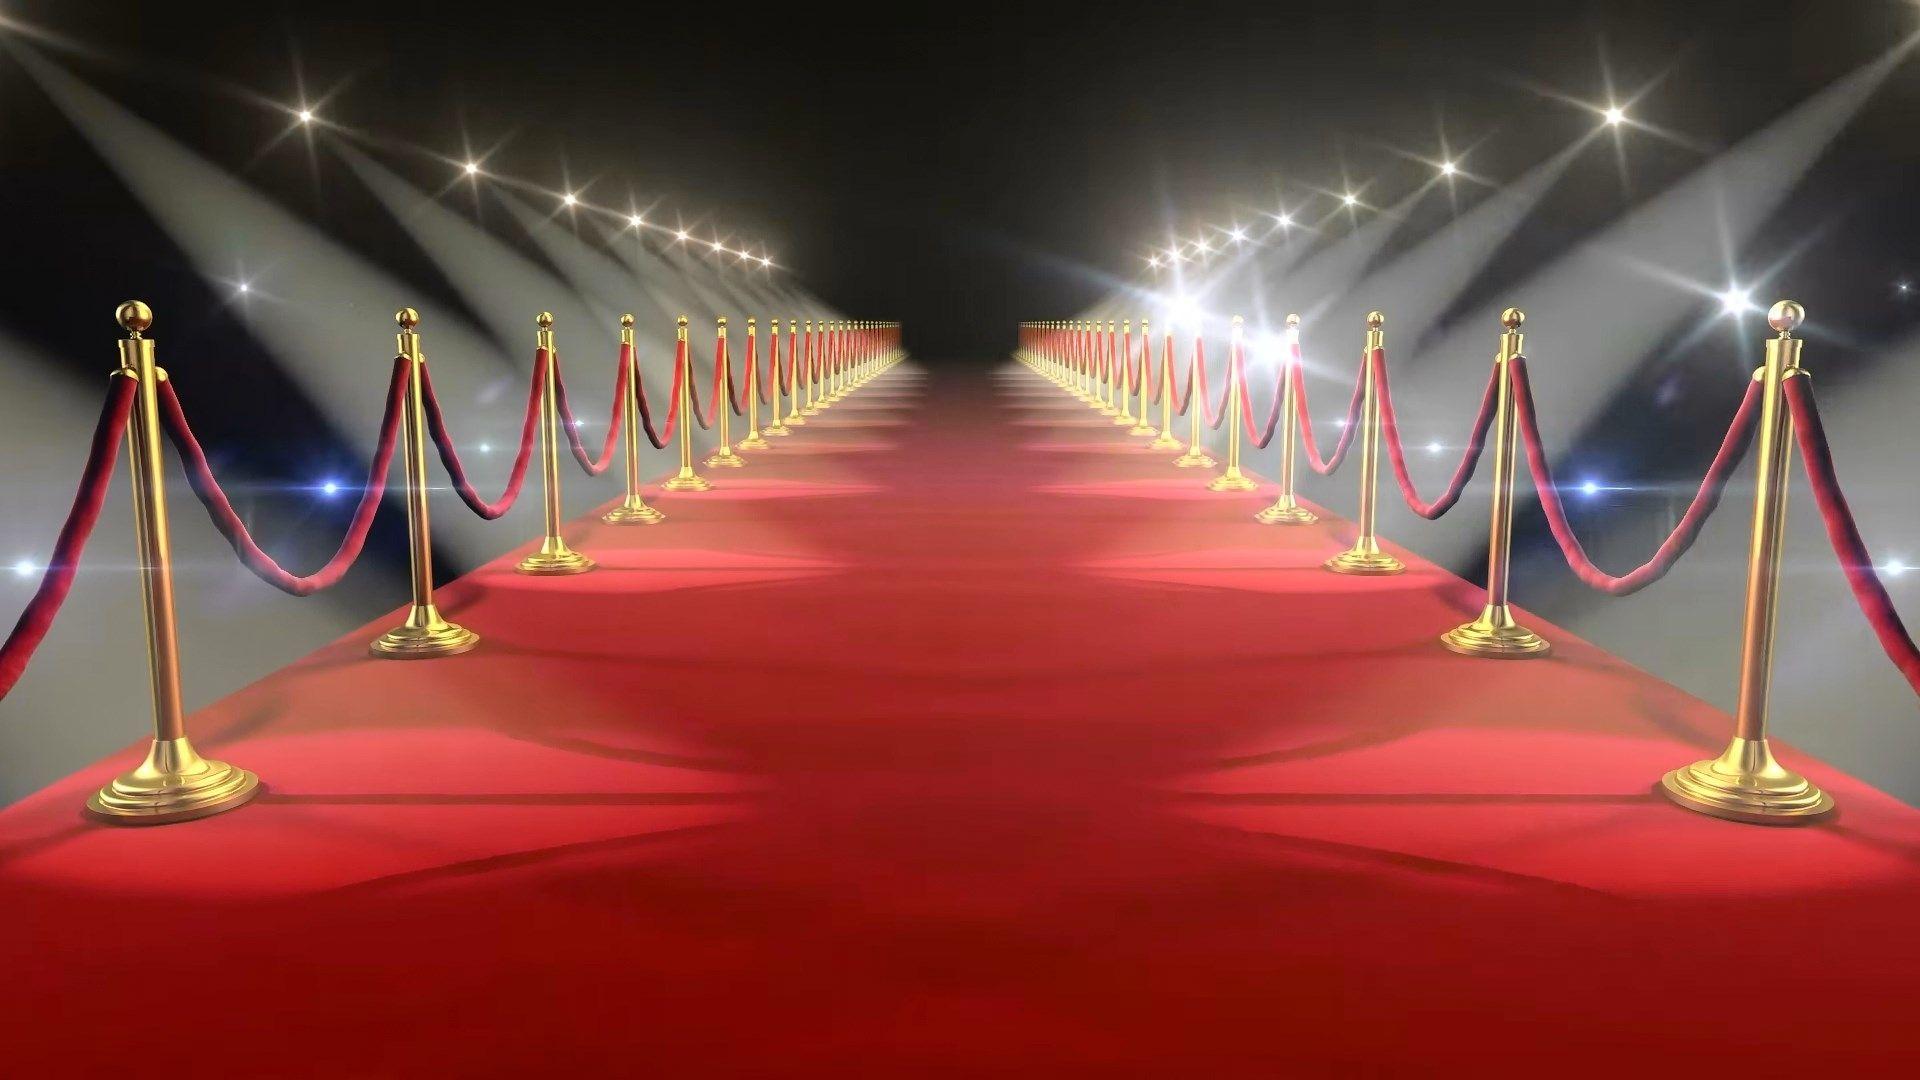 HD Red Carpet Backgrounds - Wallpaper Cave